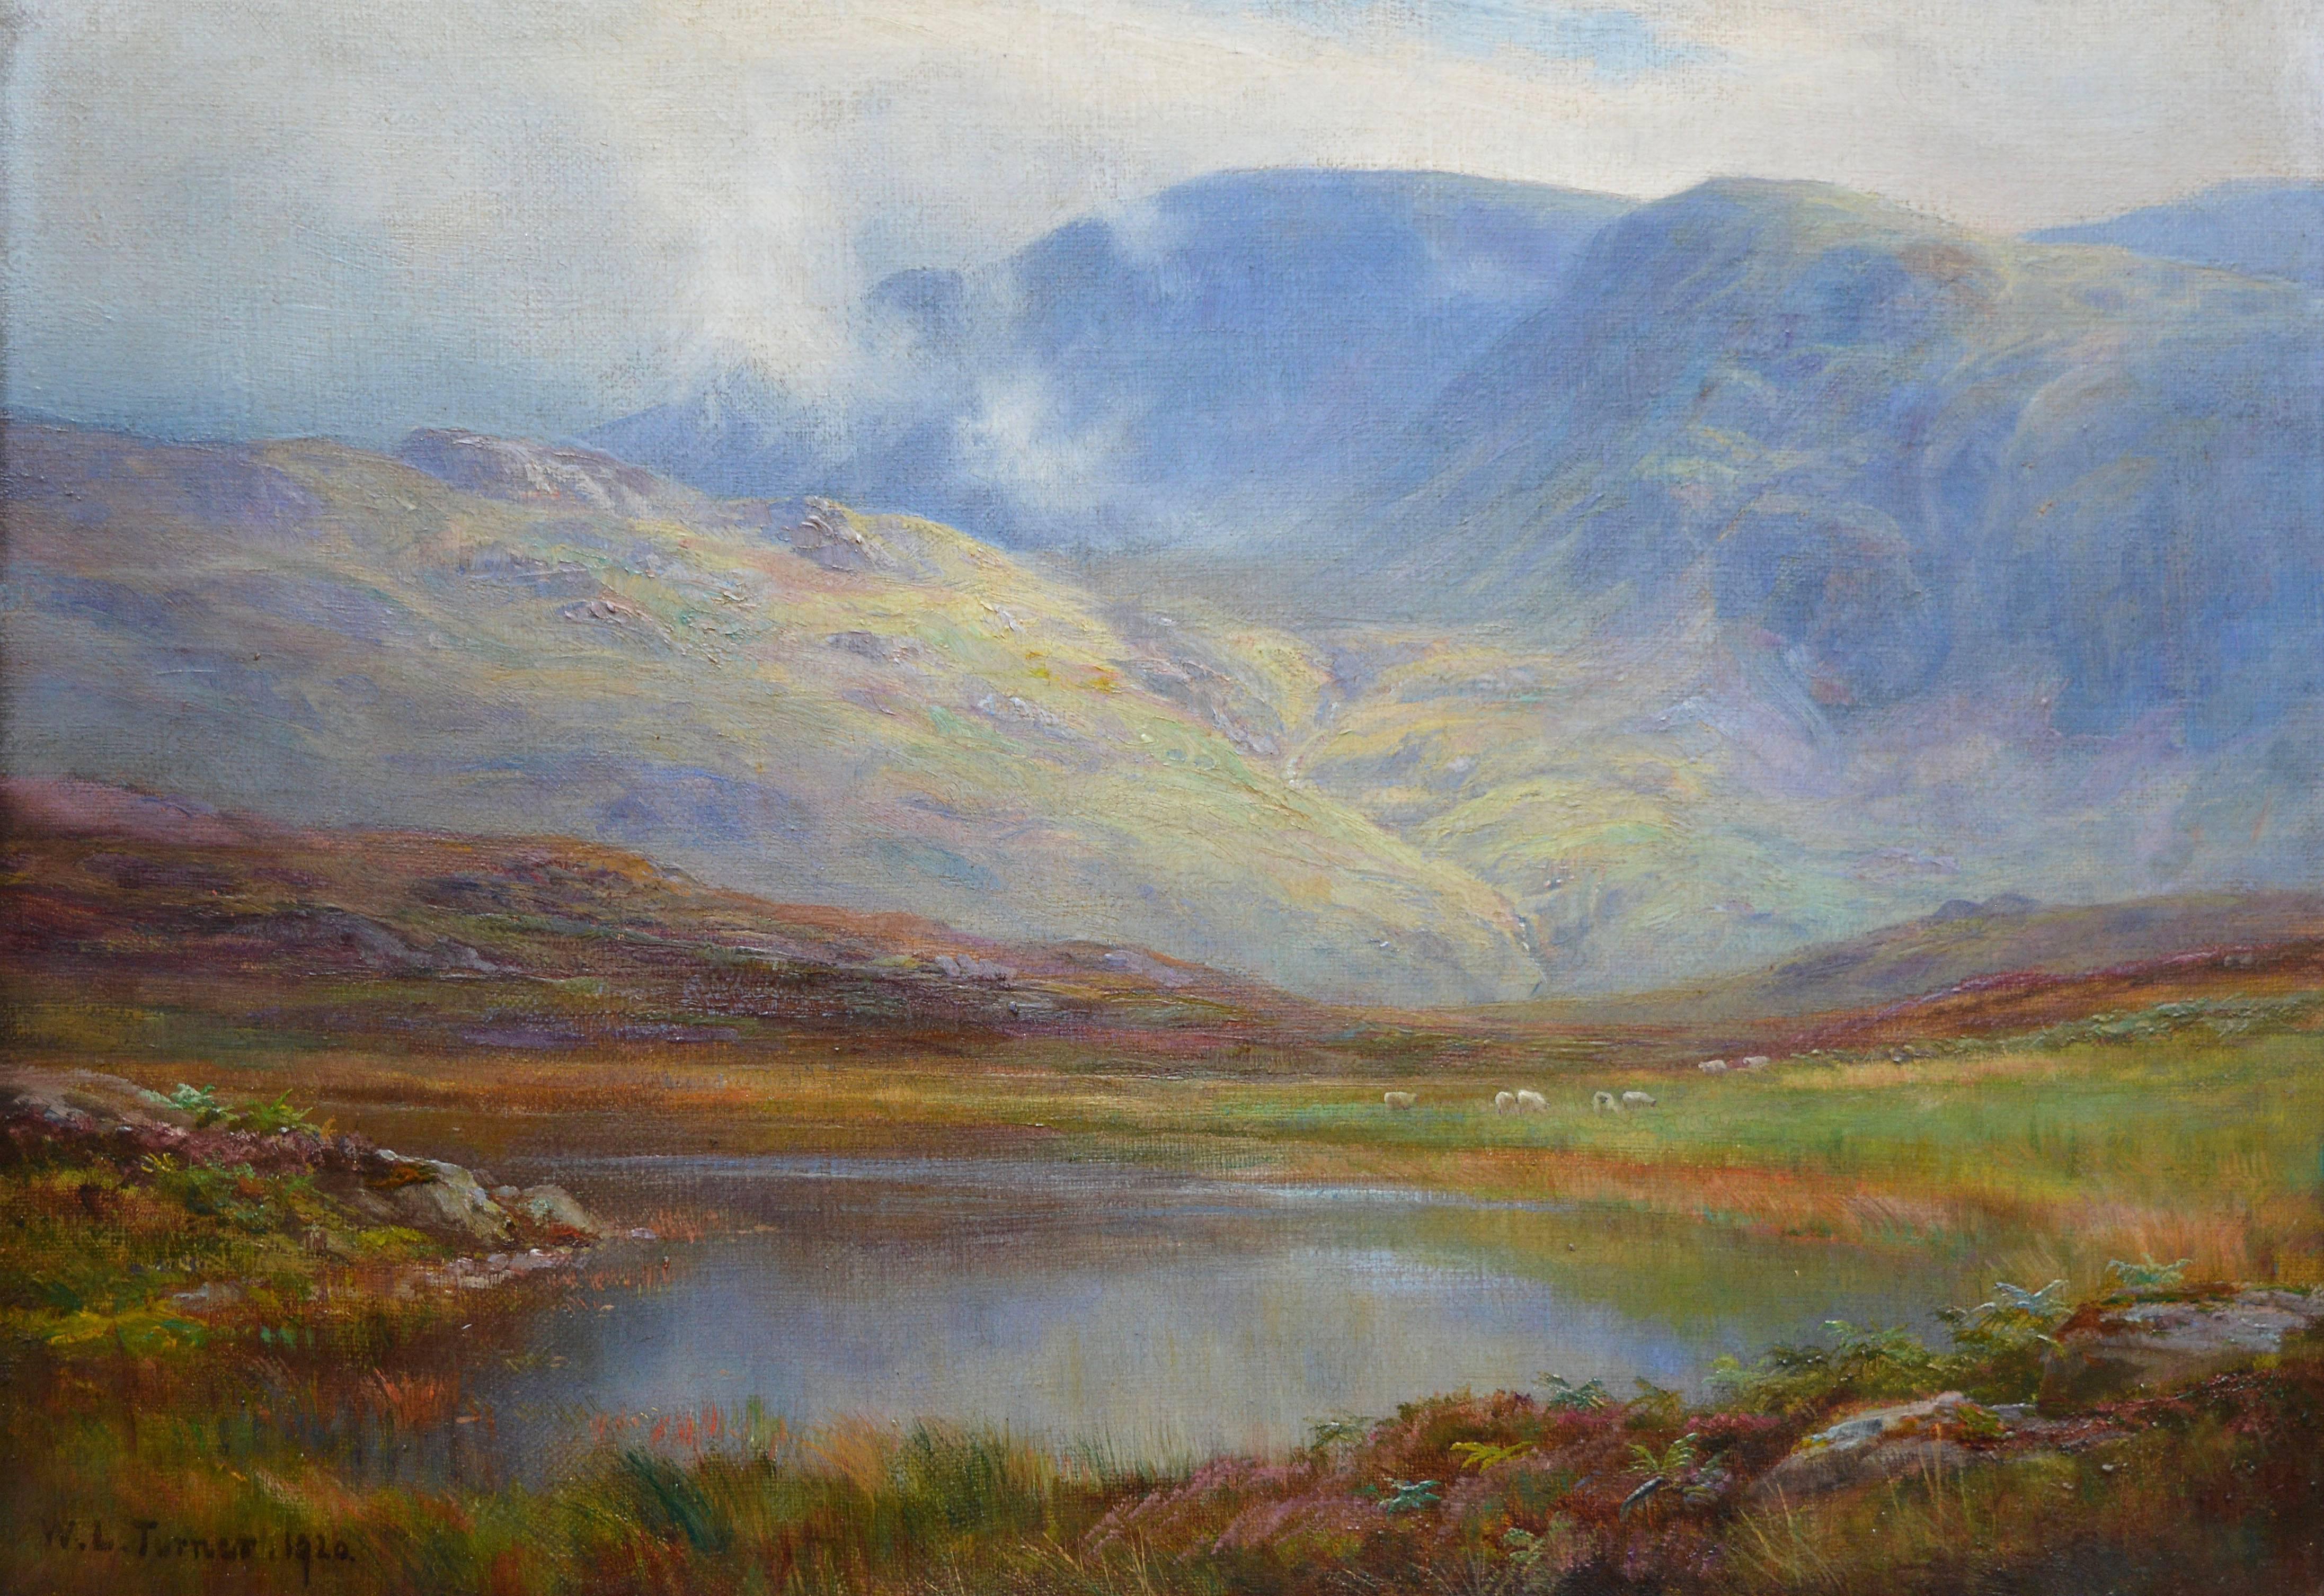 The Helvellyn Range, Lake District National Park  - Painting by William Lakin Turner